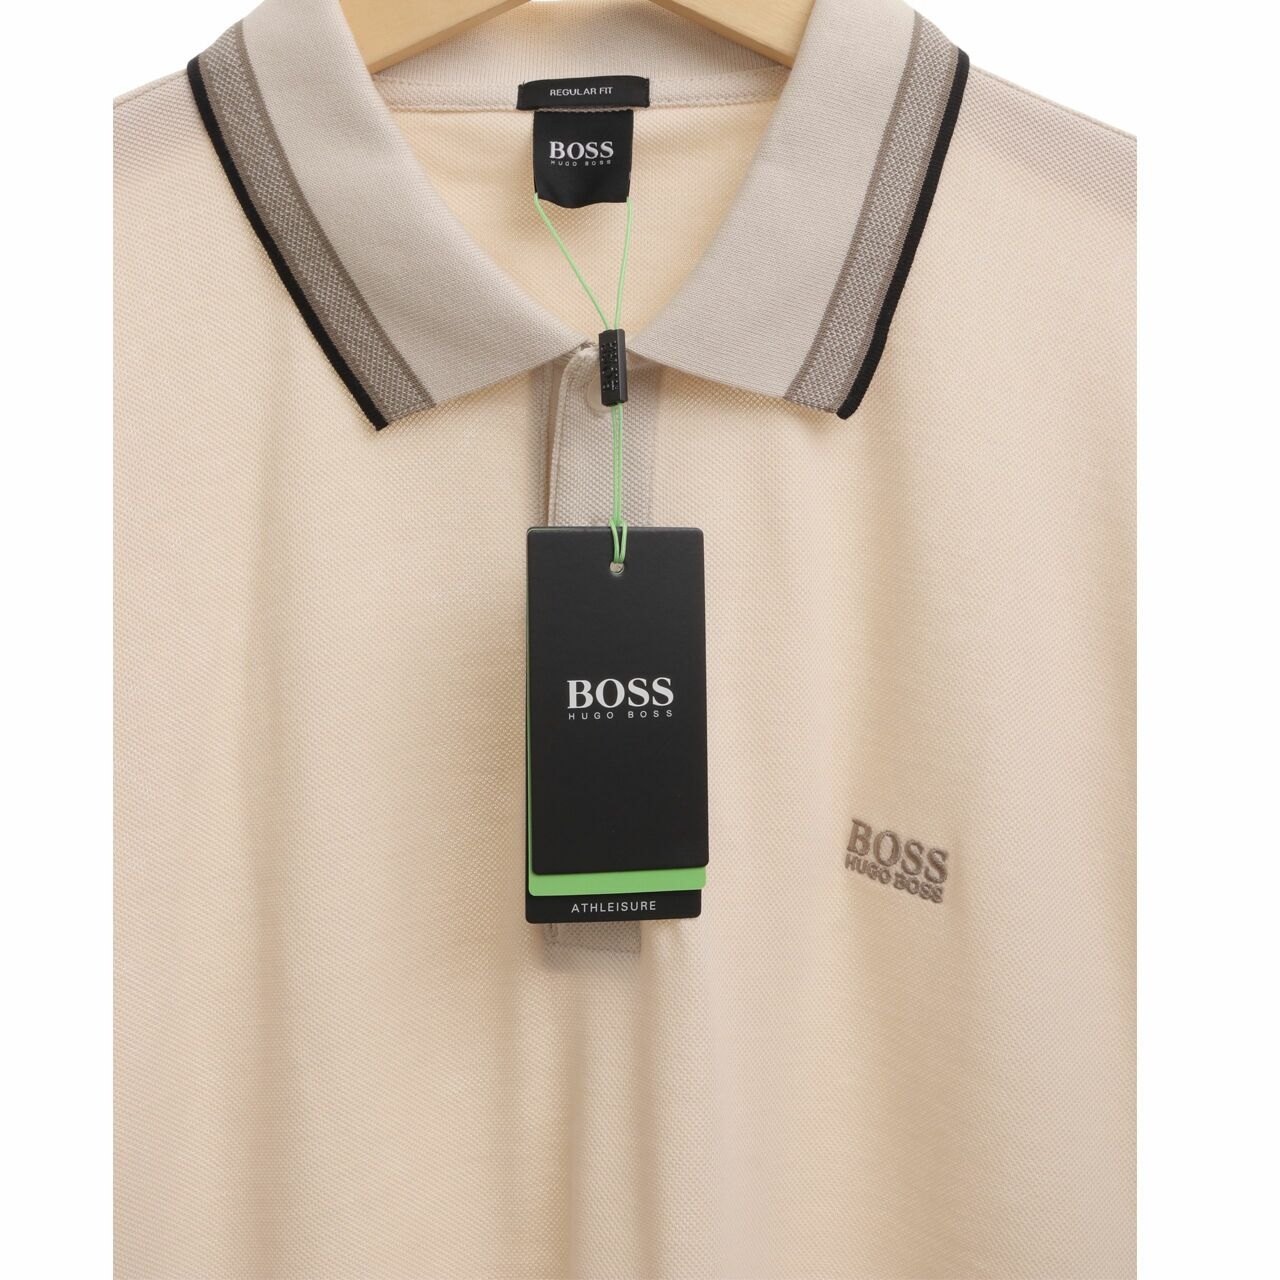 Boss by Hugo Boss Polo Shirt Paddy 01332 In Beige Nude With Collar Logo XXXL	T-Shirt